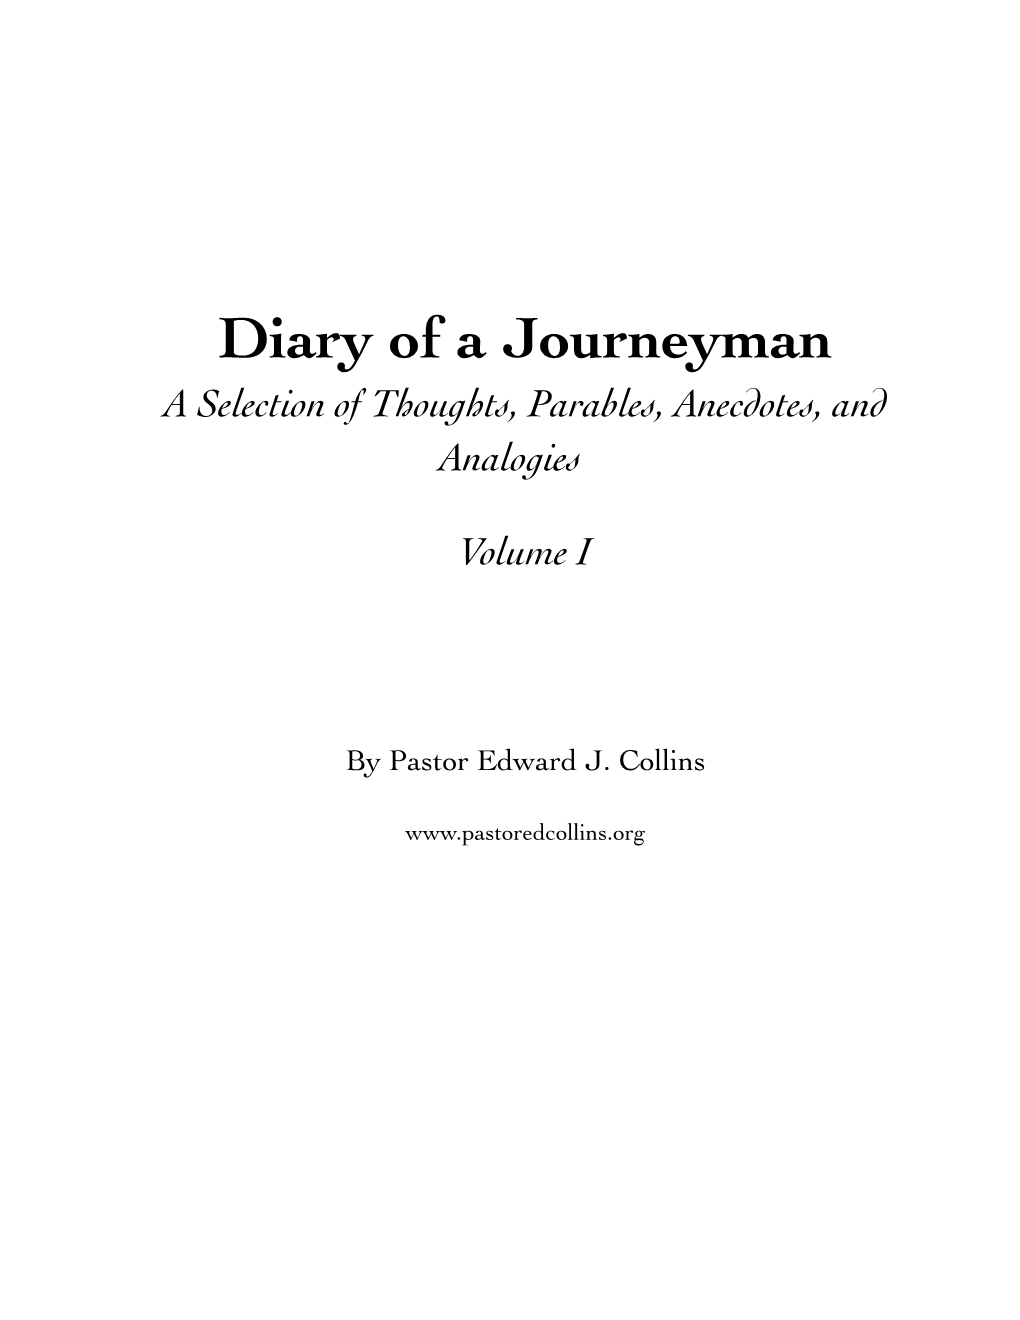 Diary of a Journeyman a Selection of Thoughts, Parables, Anecdotes, and Analogies